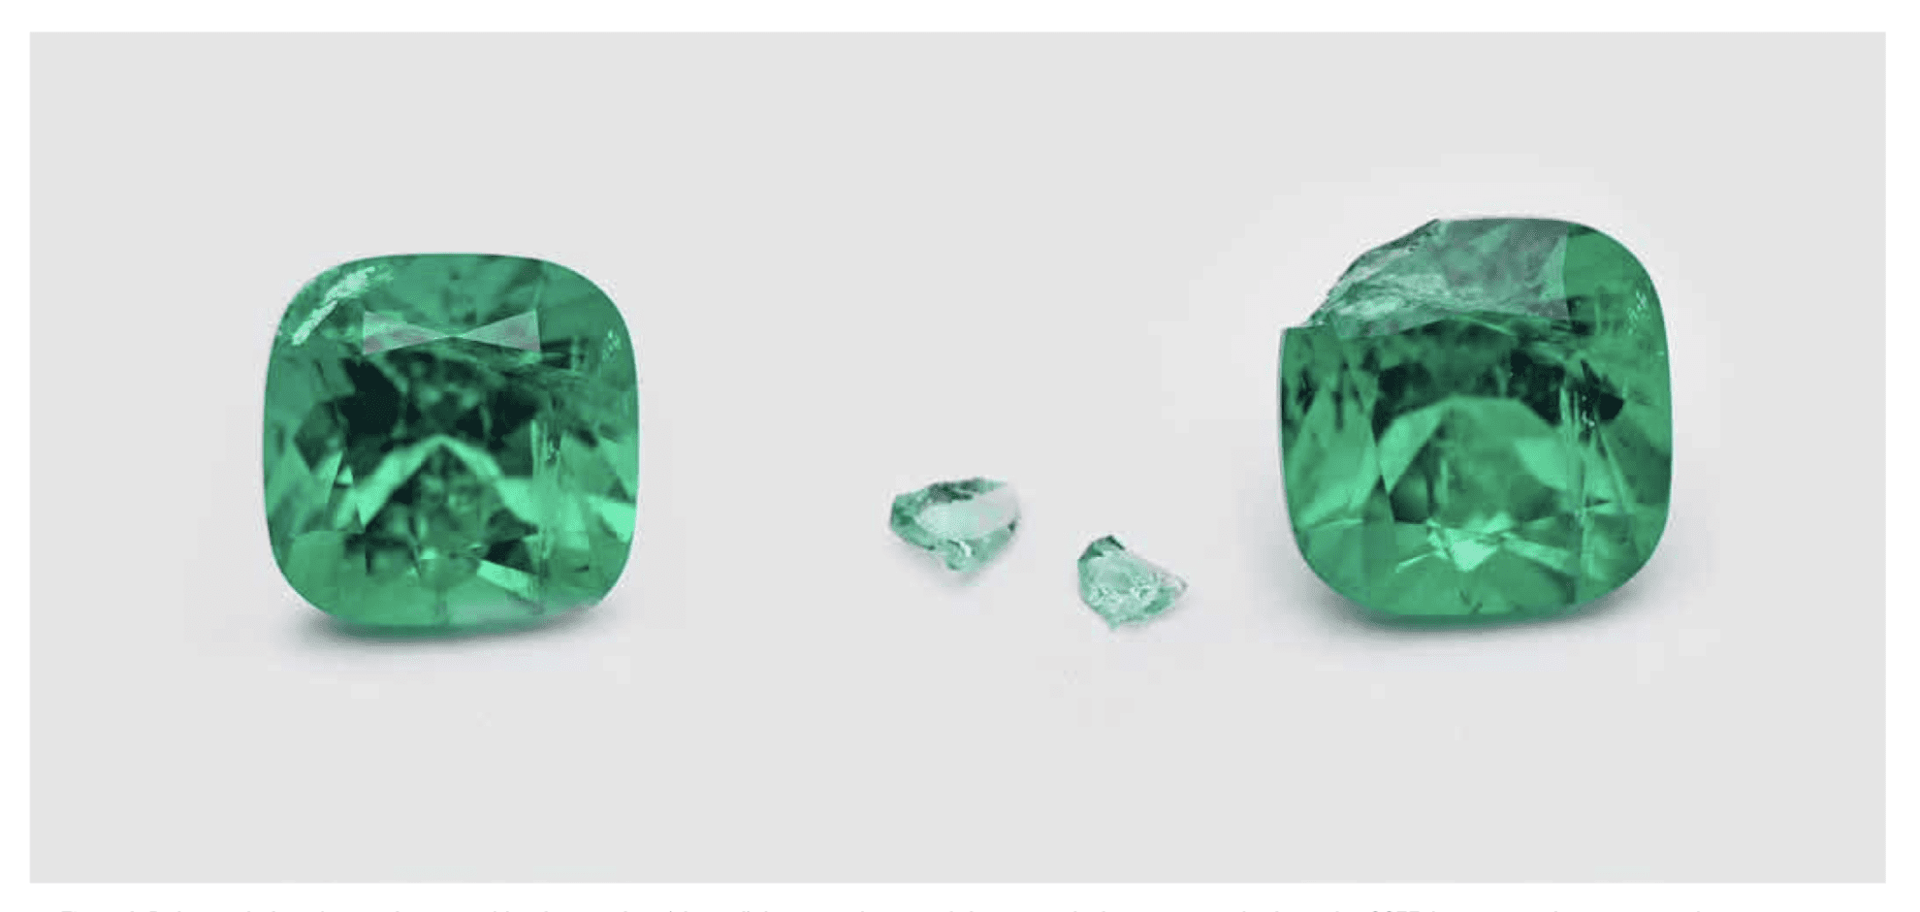 chipped emerald with cleaned fissure - emerald enhancements